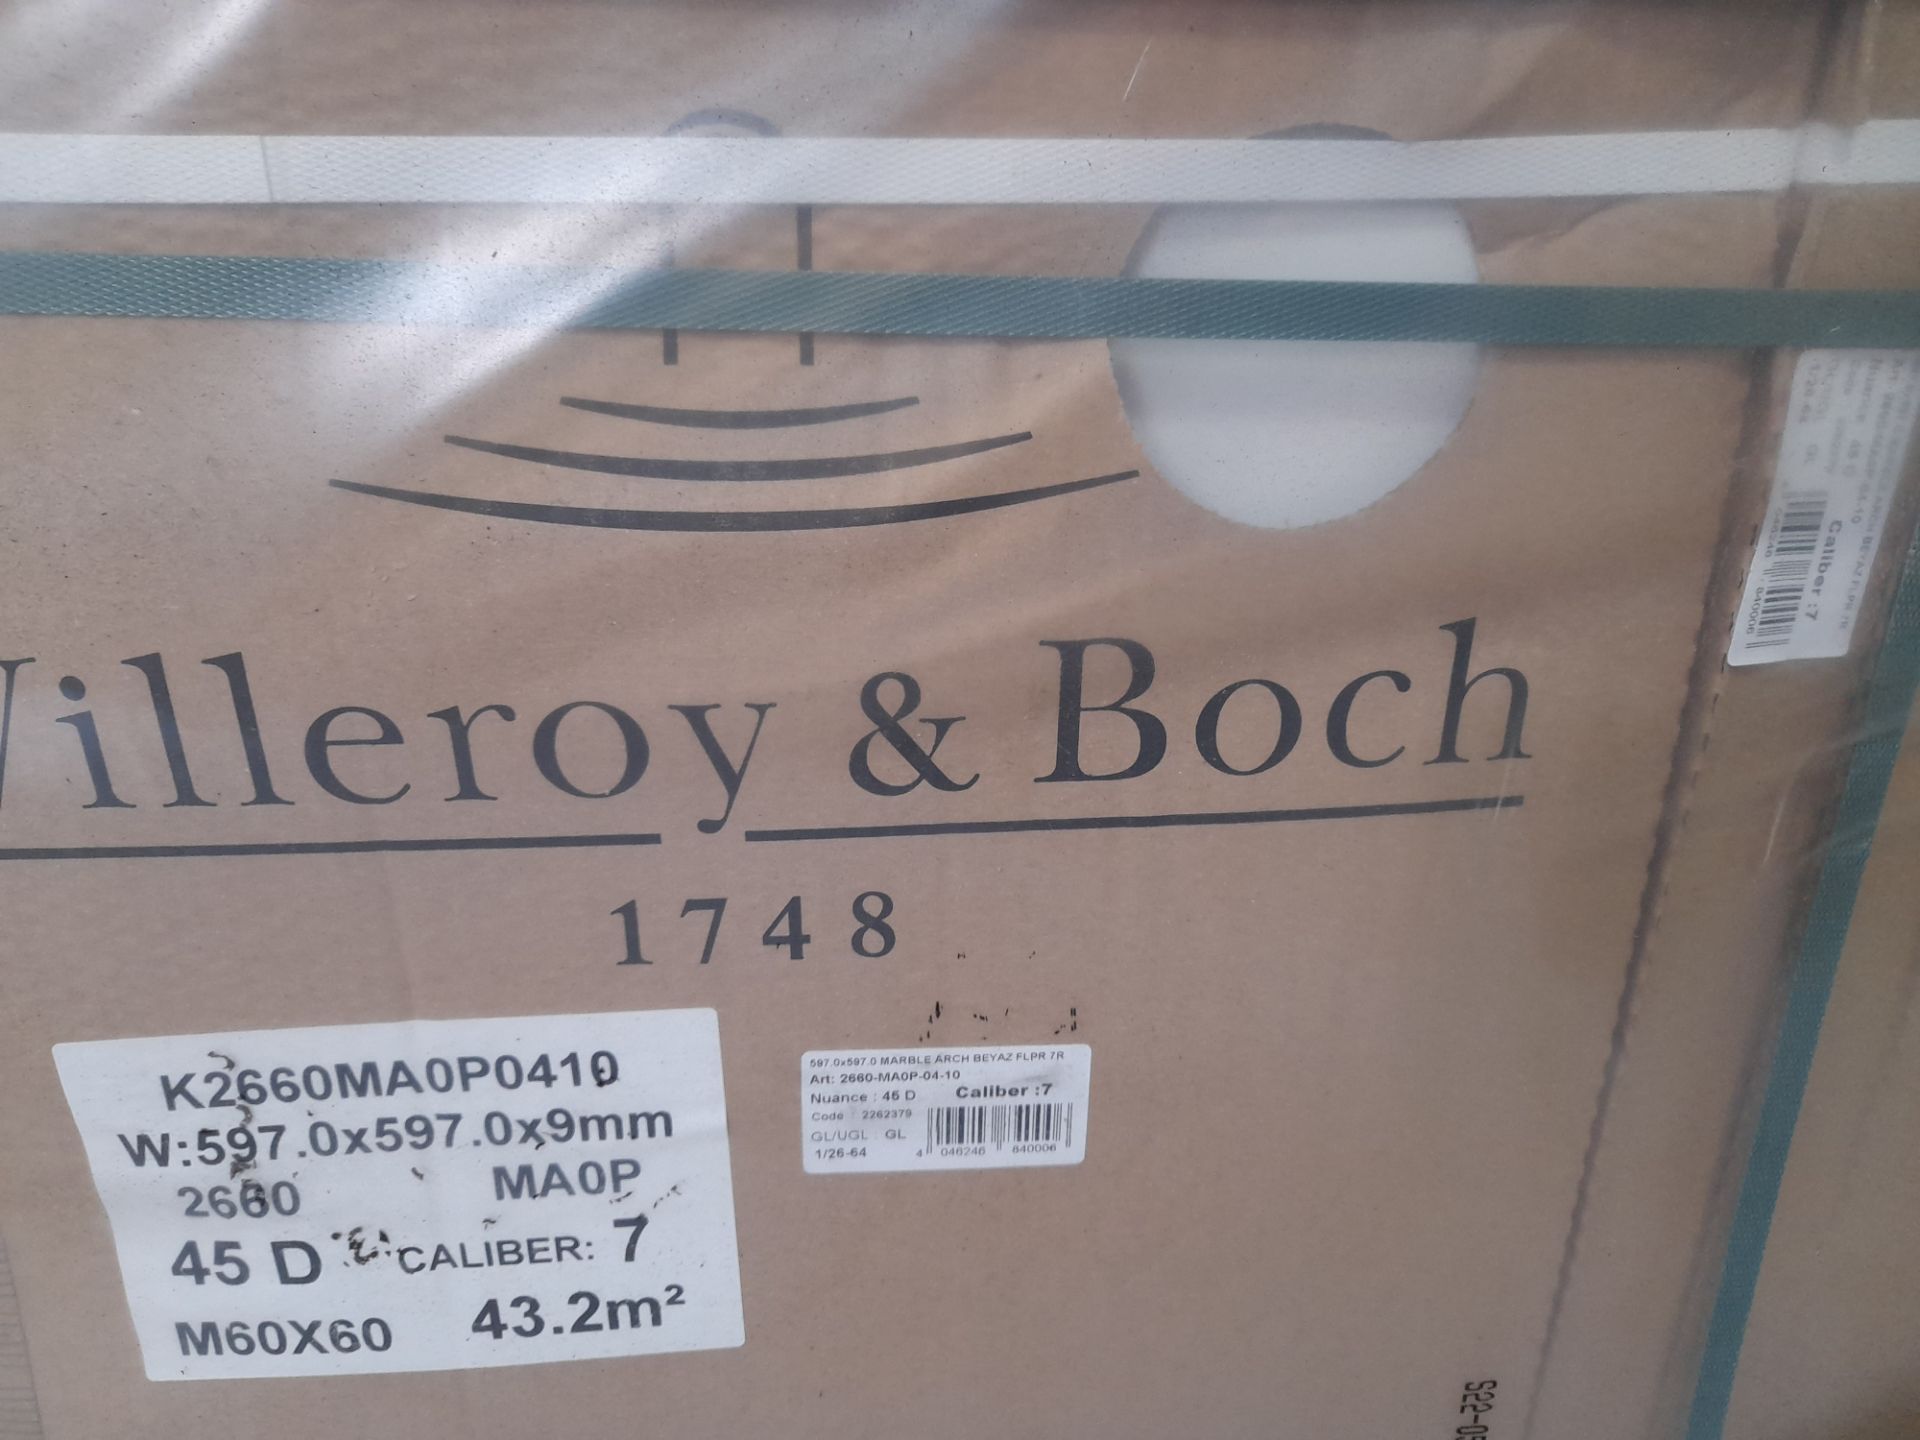 Villeroy & Boch marble arch betaz 60x60 to pallet - Image 2 of 2